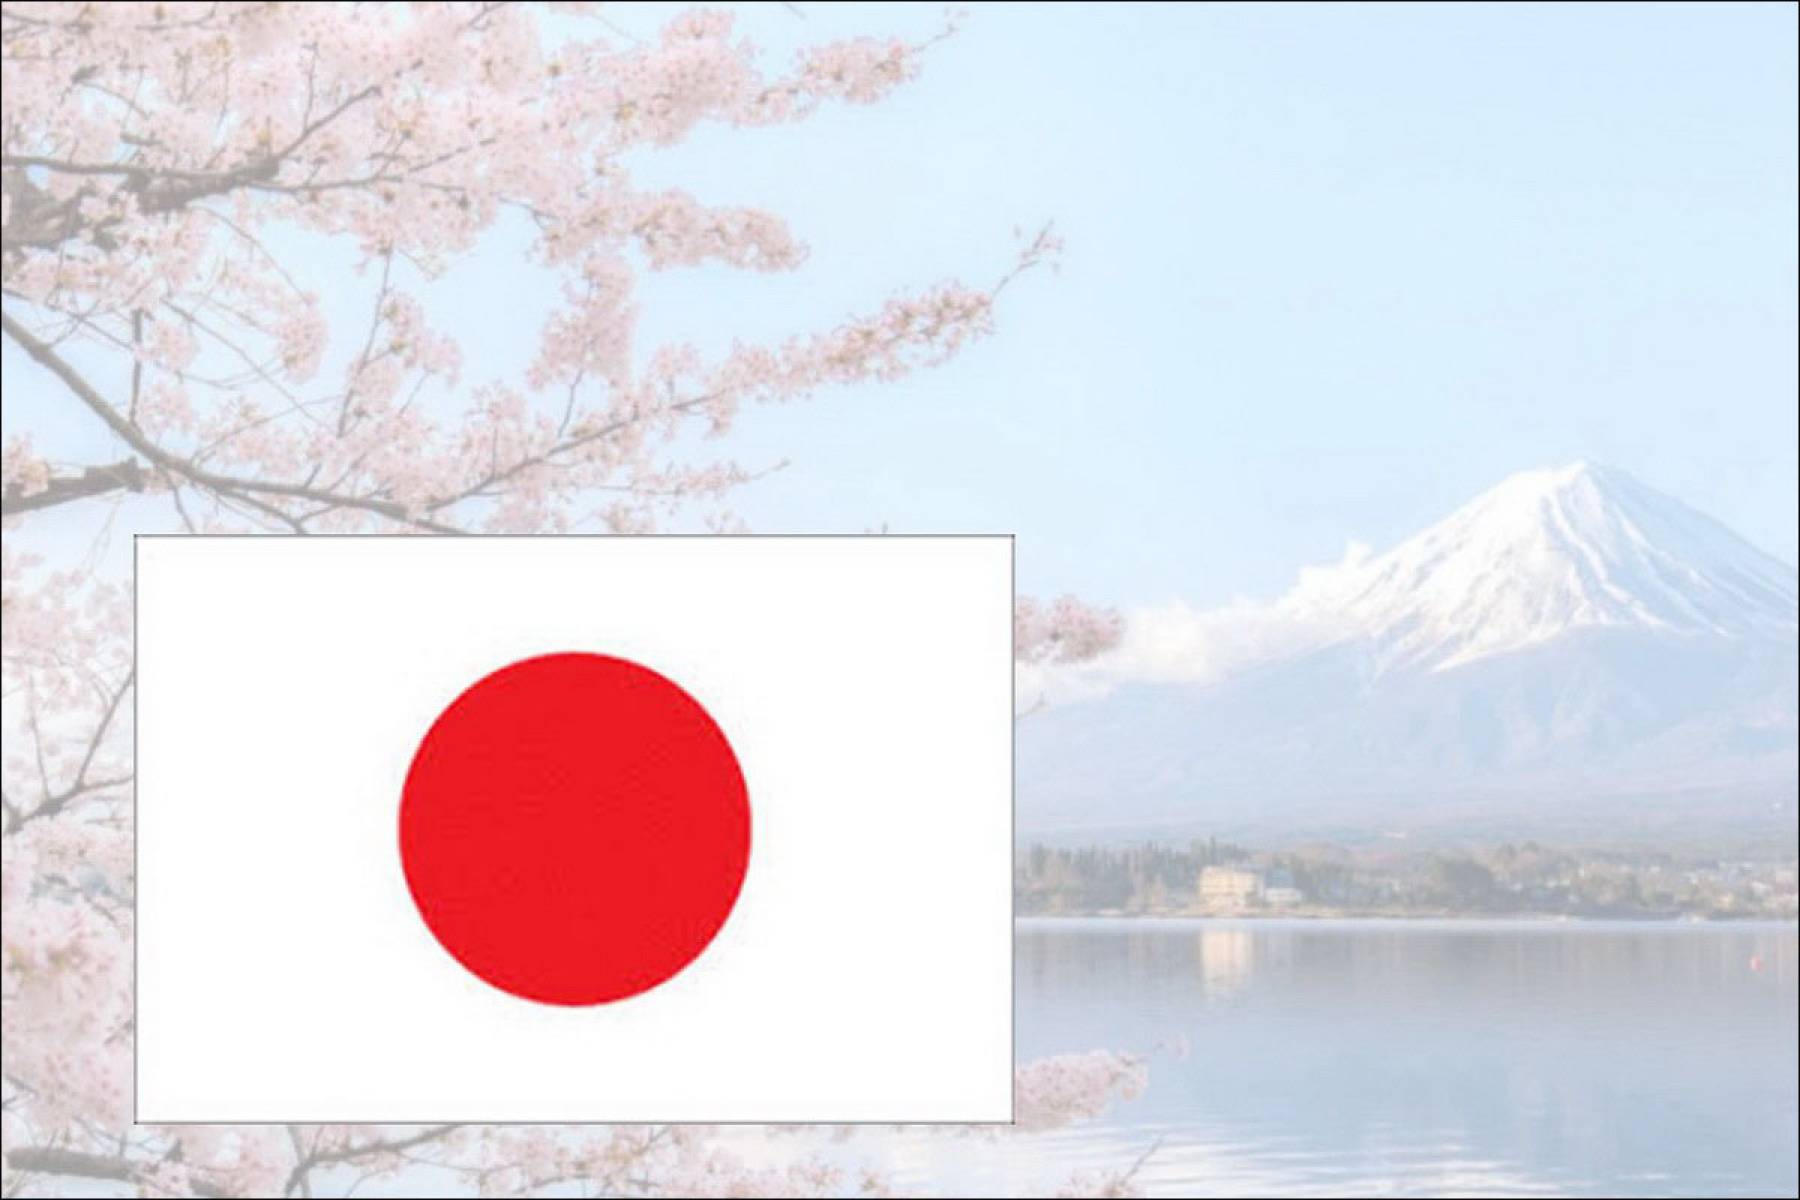 National Day of Japan, 11 February